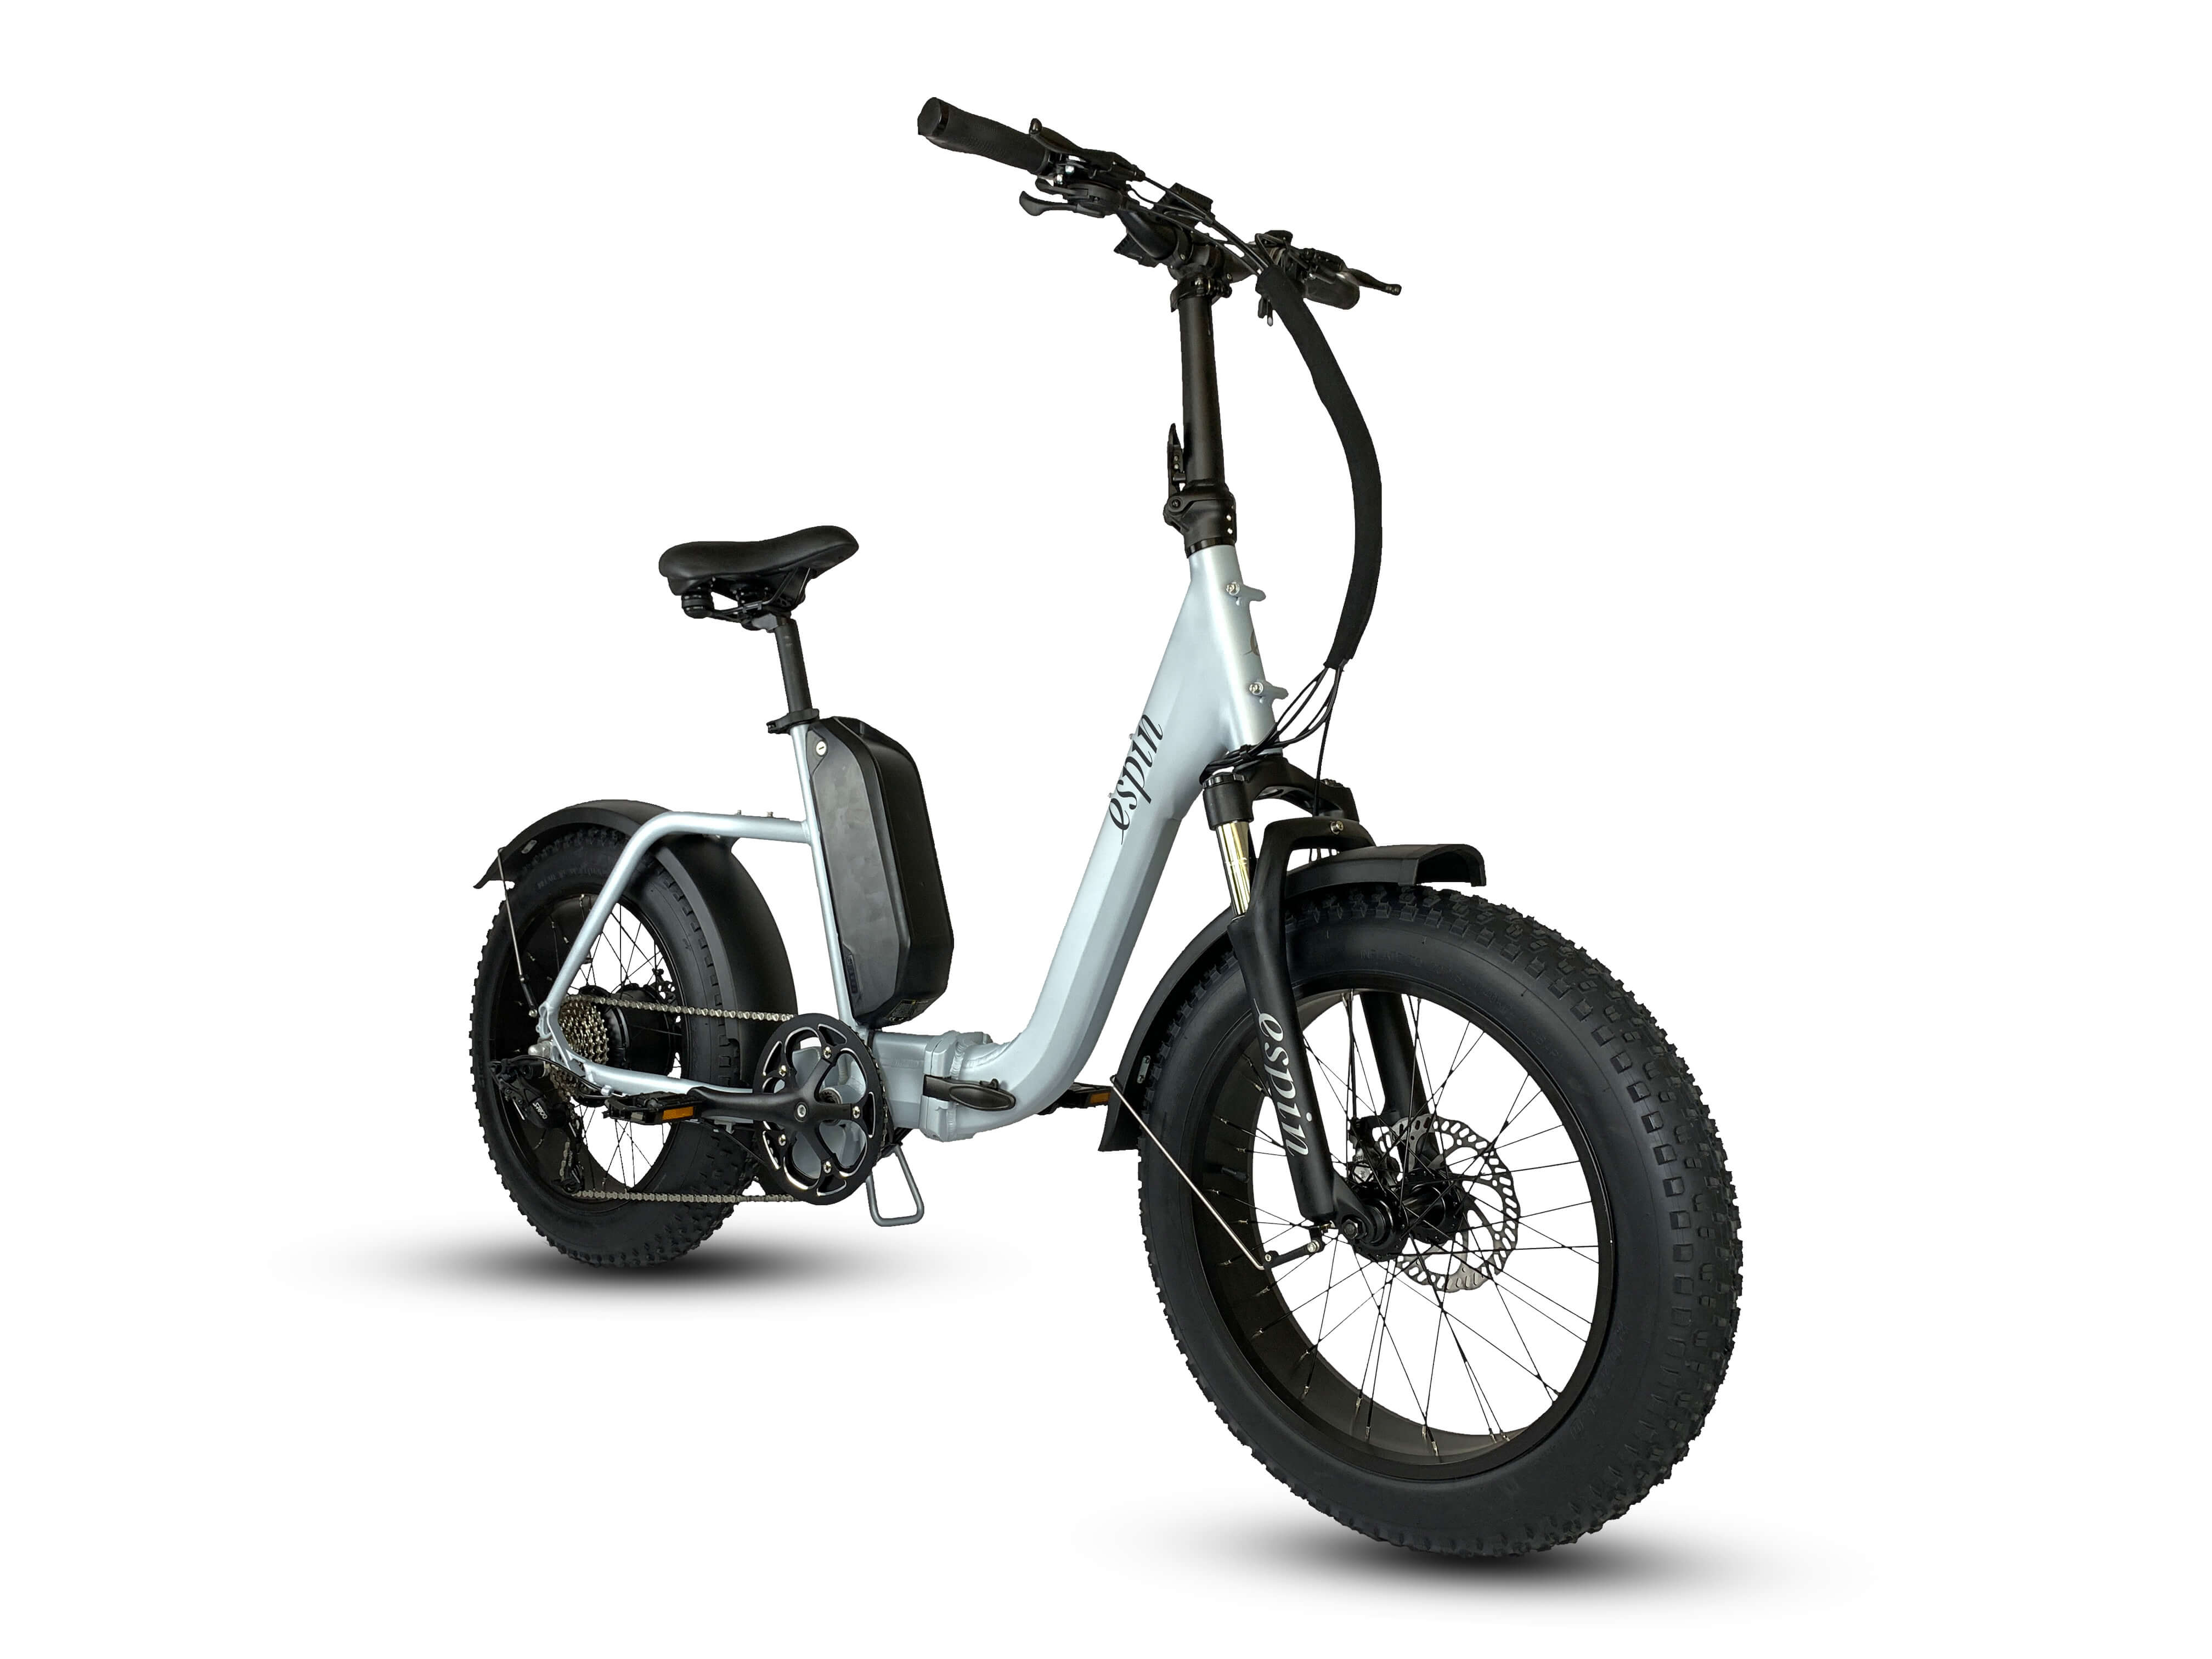 Riding and commuting by e-bike is awesome. Nesta for zipping from city streets to train to work or anywhere else features both pedal assist and throttle mode.